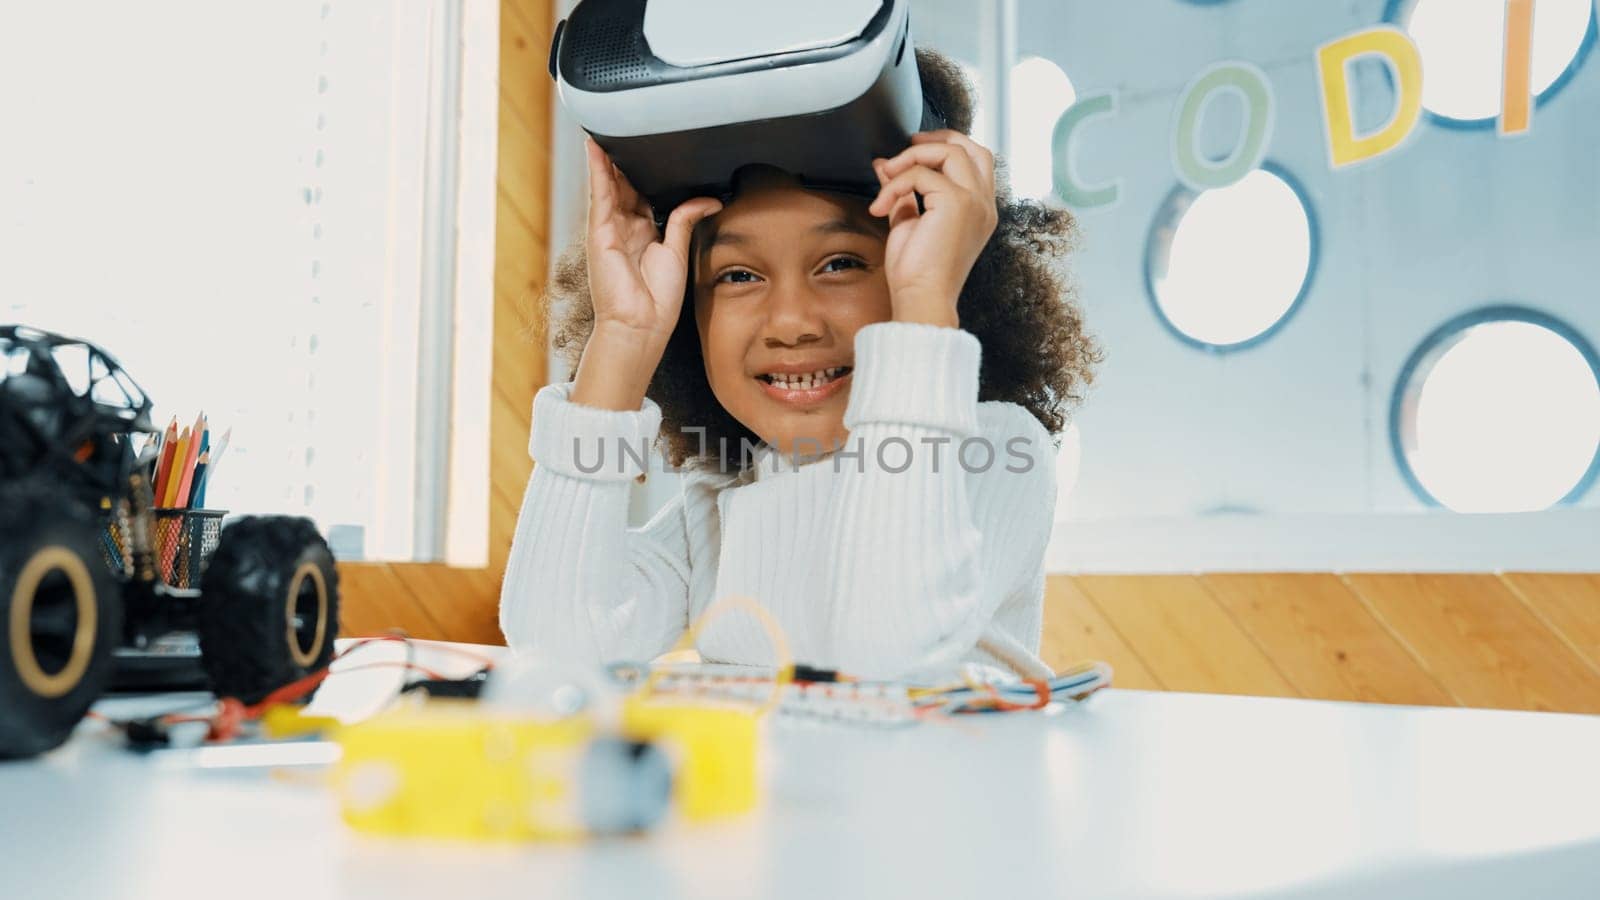 African girl taking off VR glass or head set while looking at camera. Student smiling at camera with colored pencil and laptop placed on table in STEM technology class. Online education. Erudition.